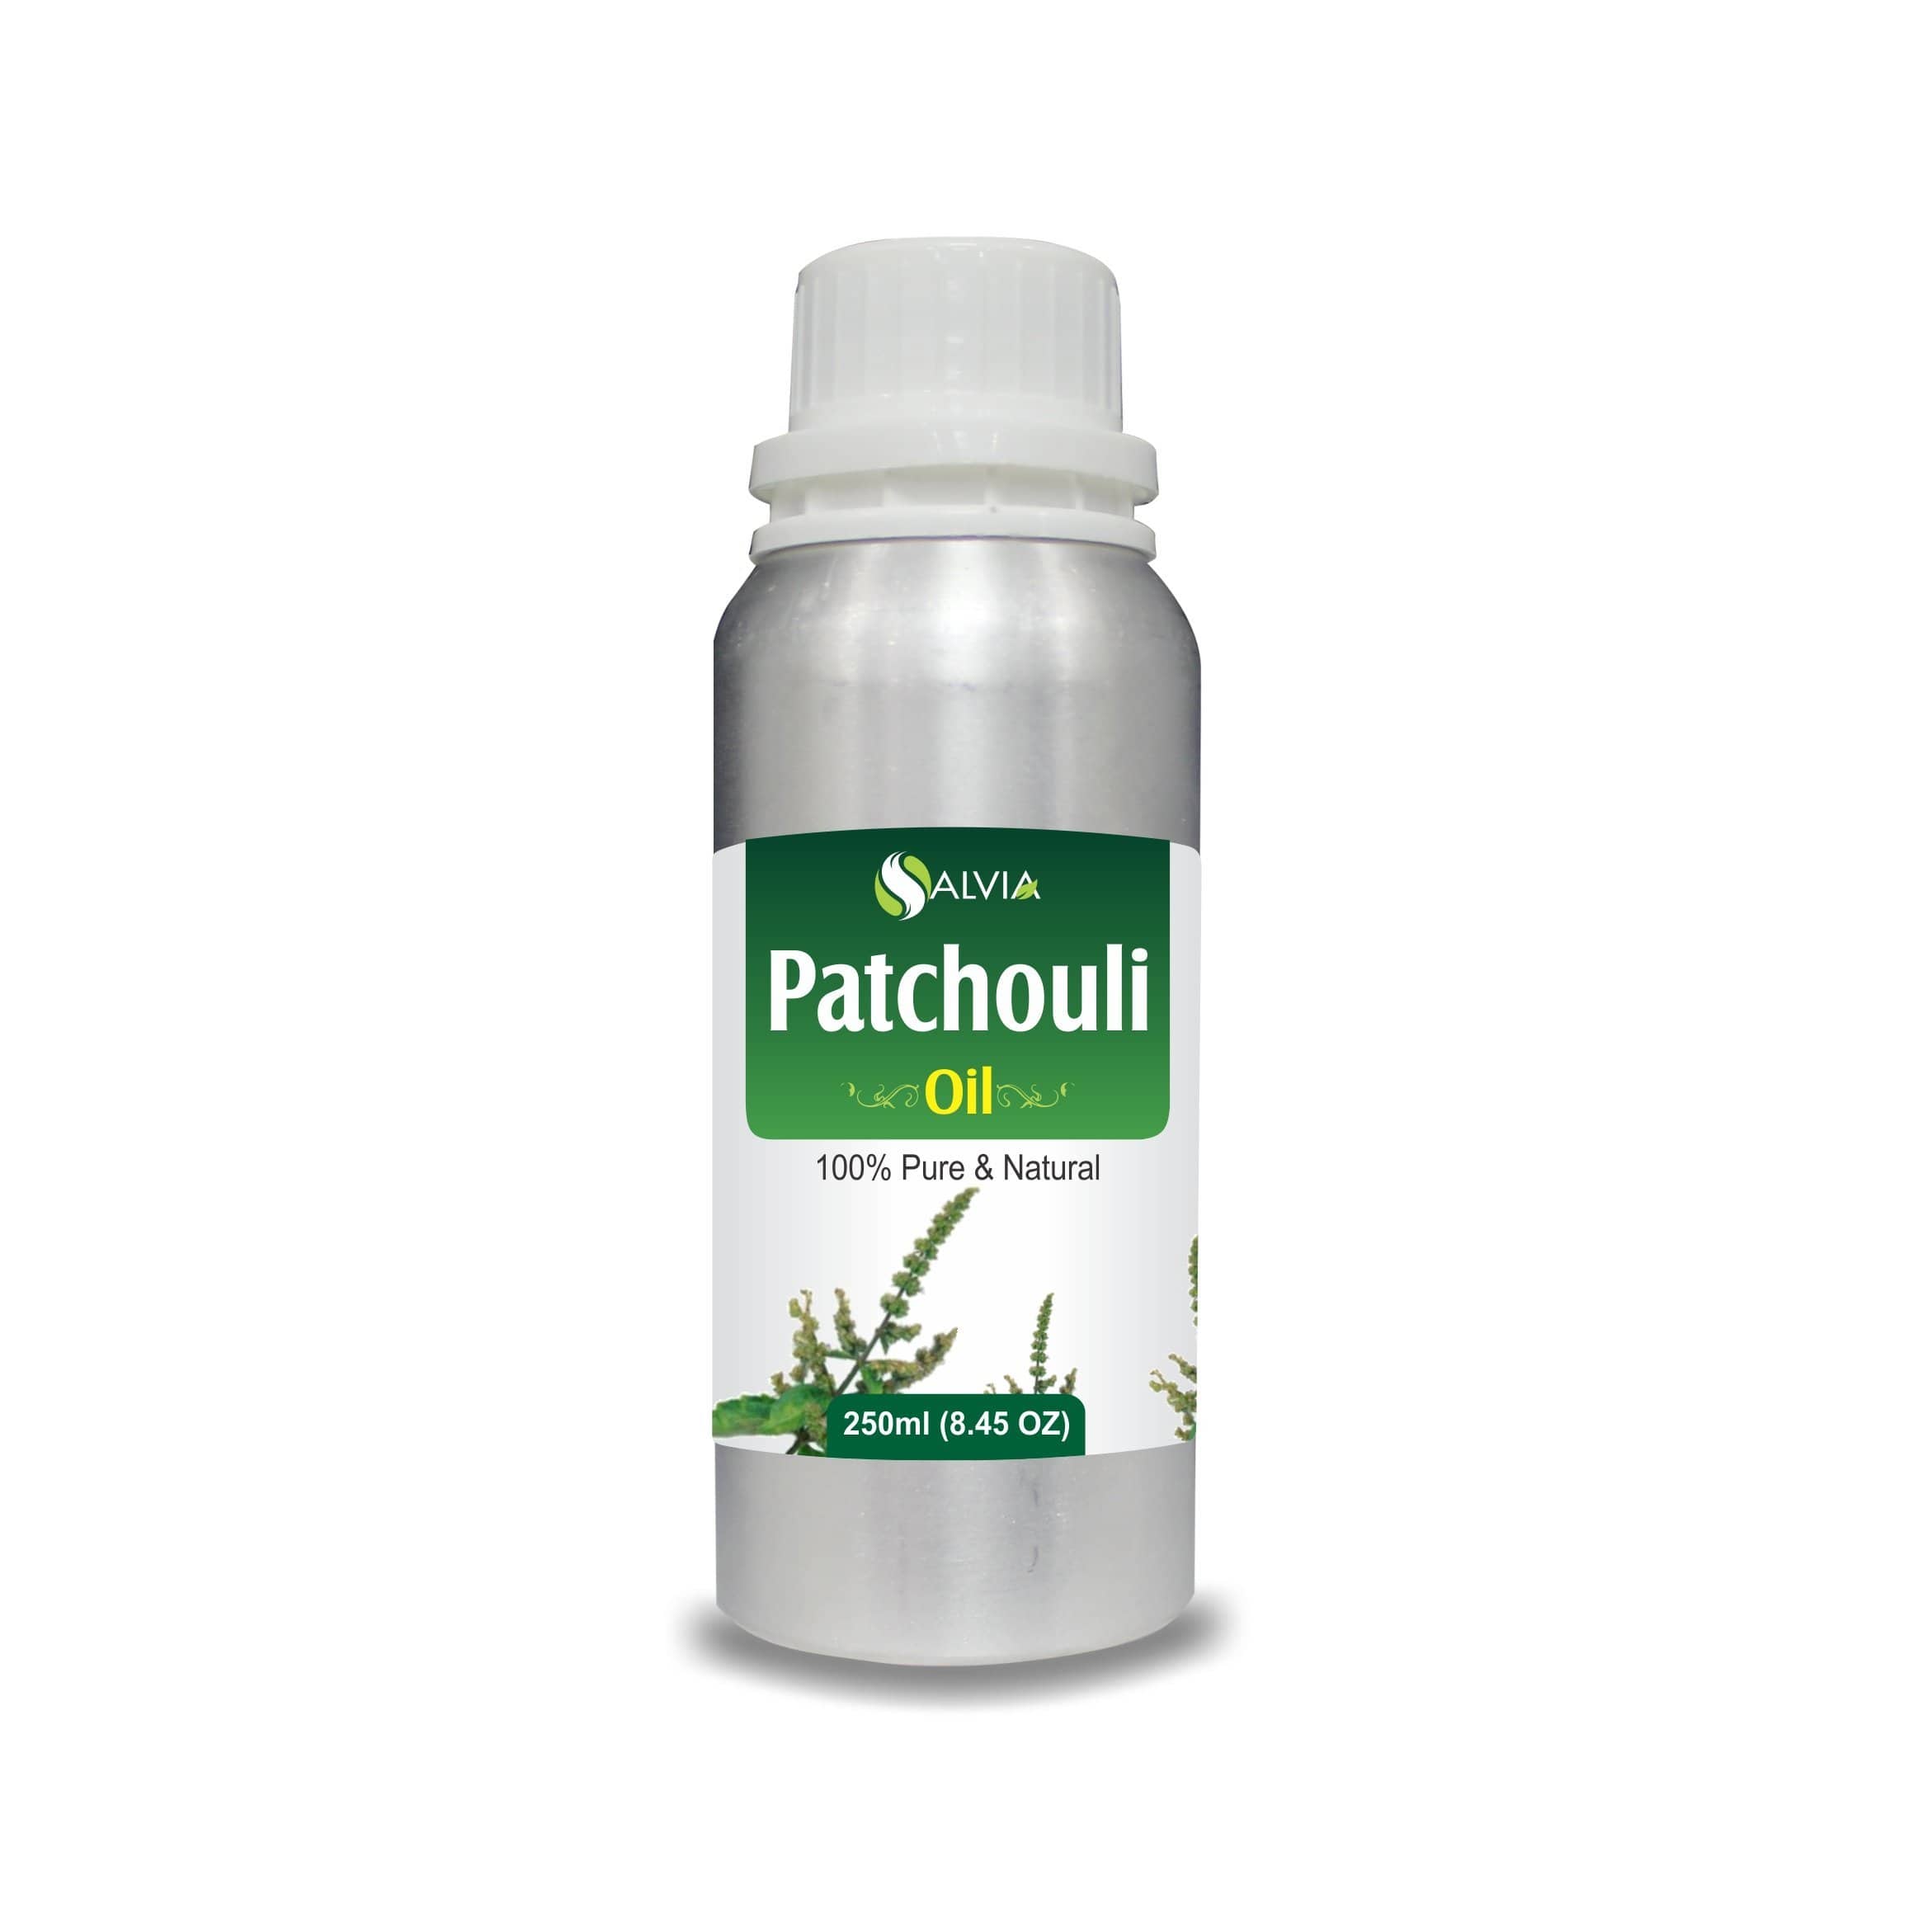 patchouli oil in hindi